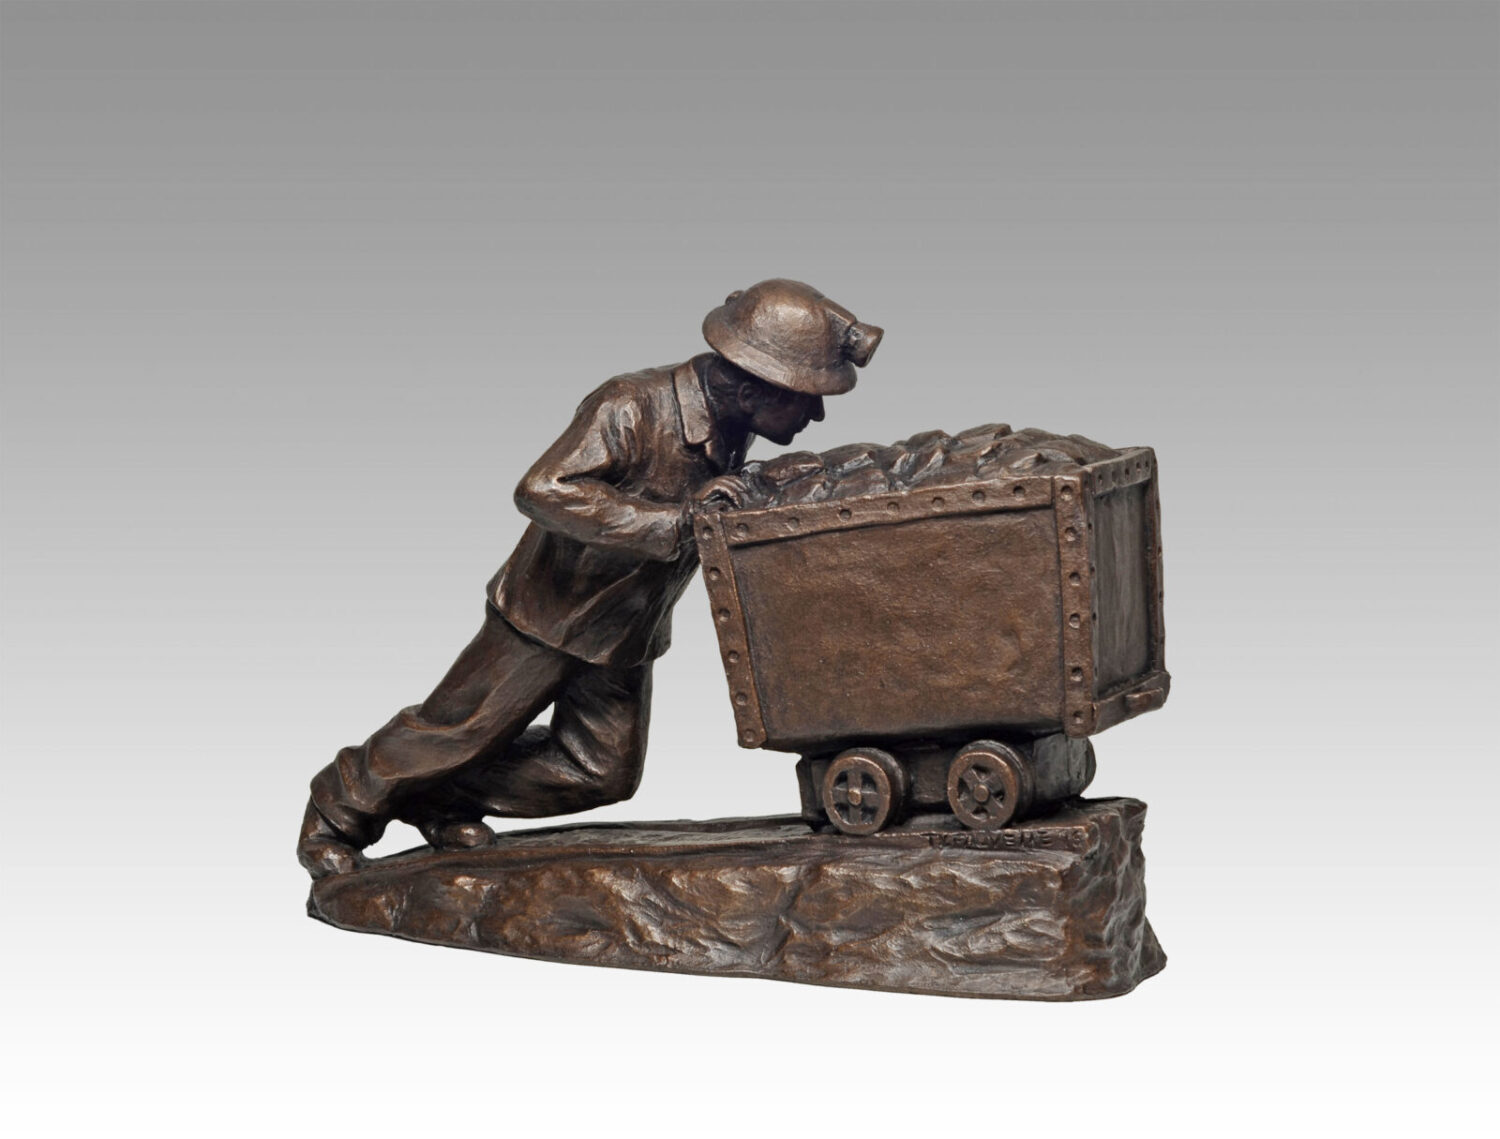 Gallery, Cartin Ore, $325 CAD, Metal Infused, 13 ¾” L x 9 ¼" H, Edition 80, Mining Sculpture of a miner pushing an ore cart, Sculptor Tyler Fauvelle